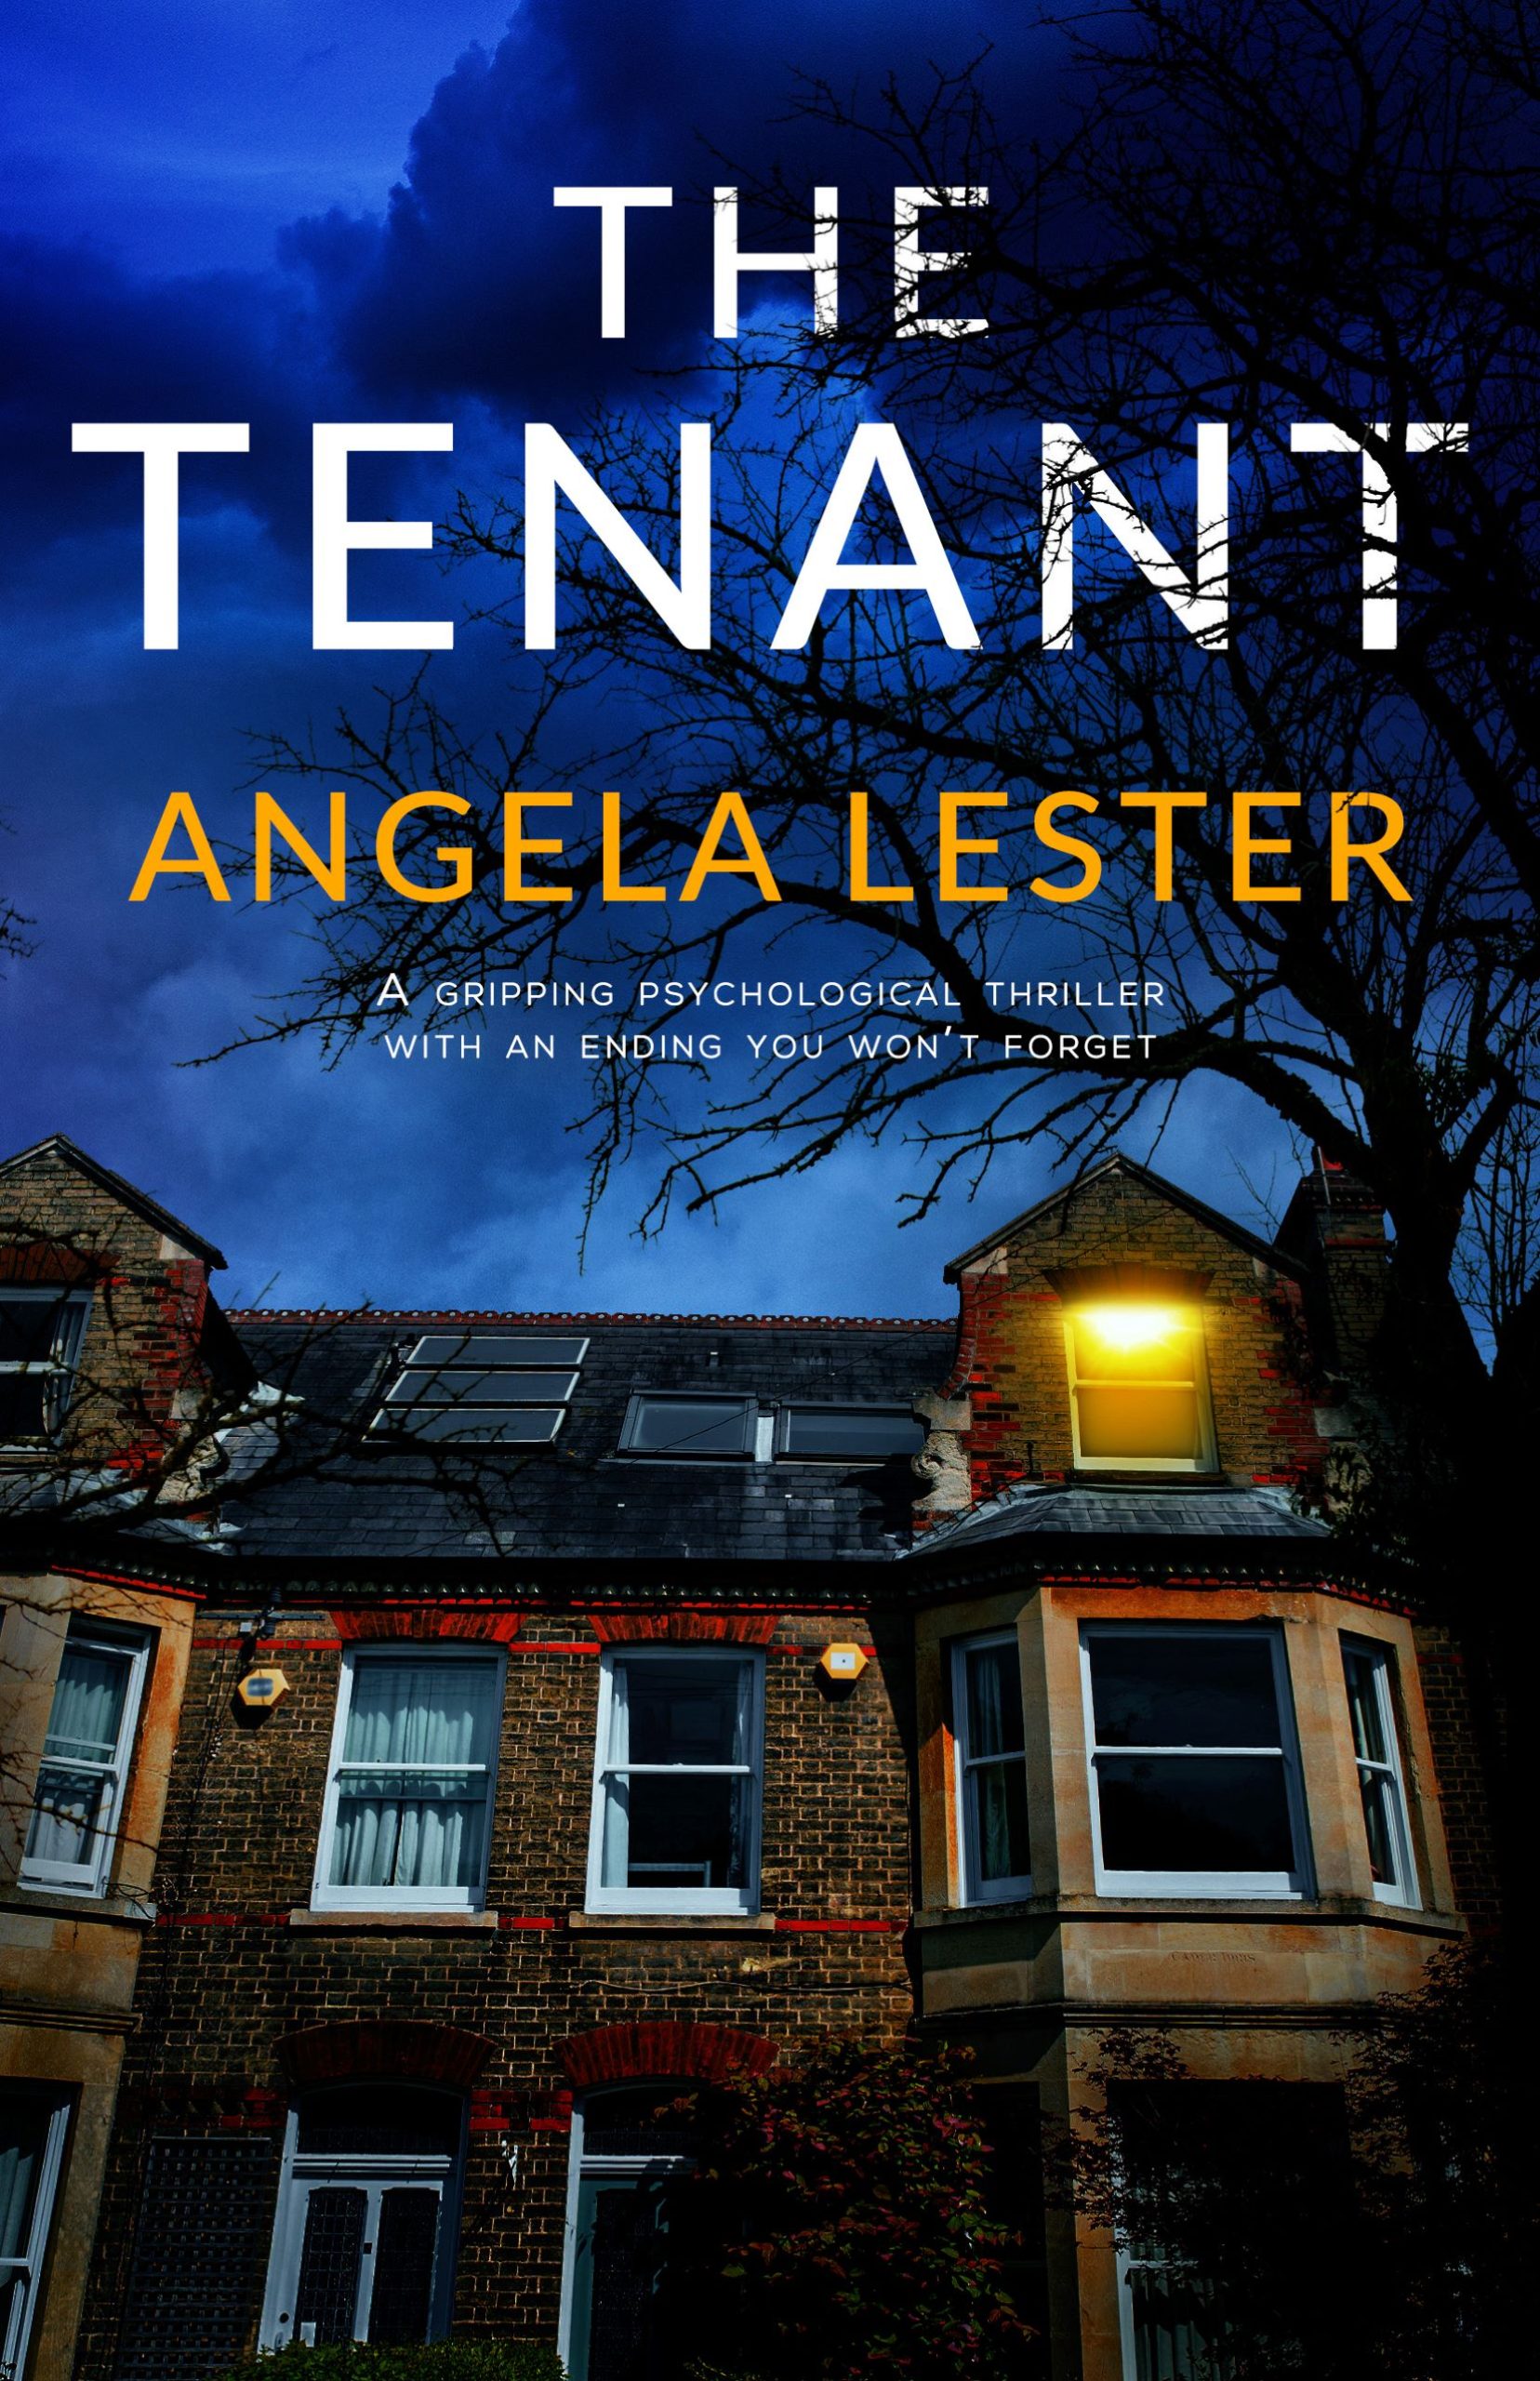 ANGELA LESTER NEW RELEASE – THE TENANT